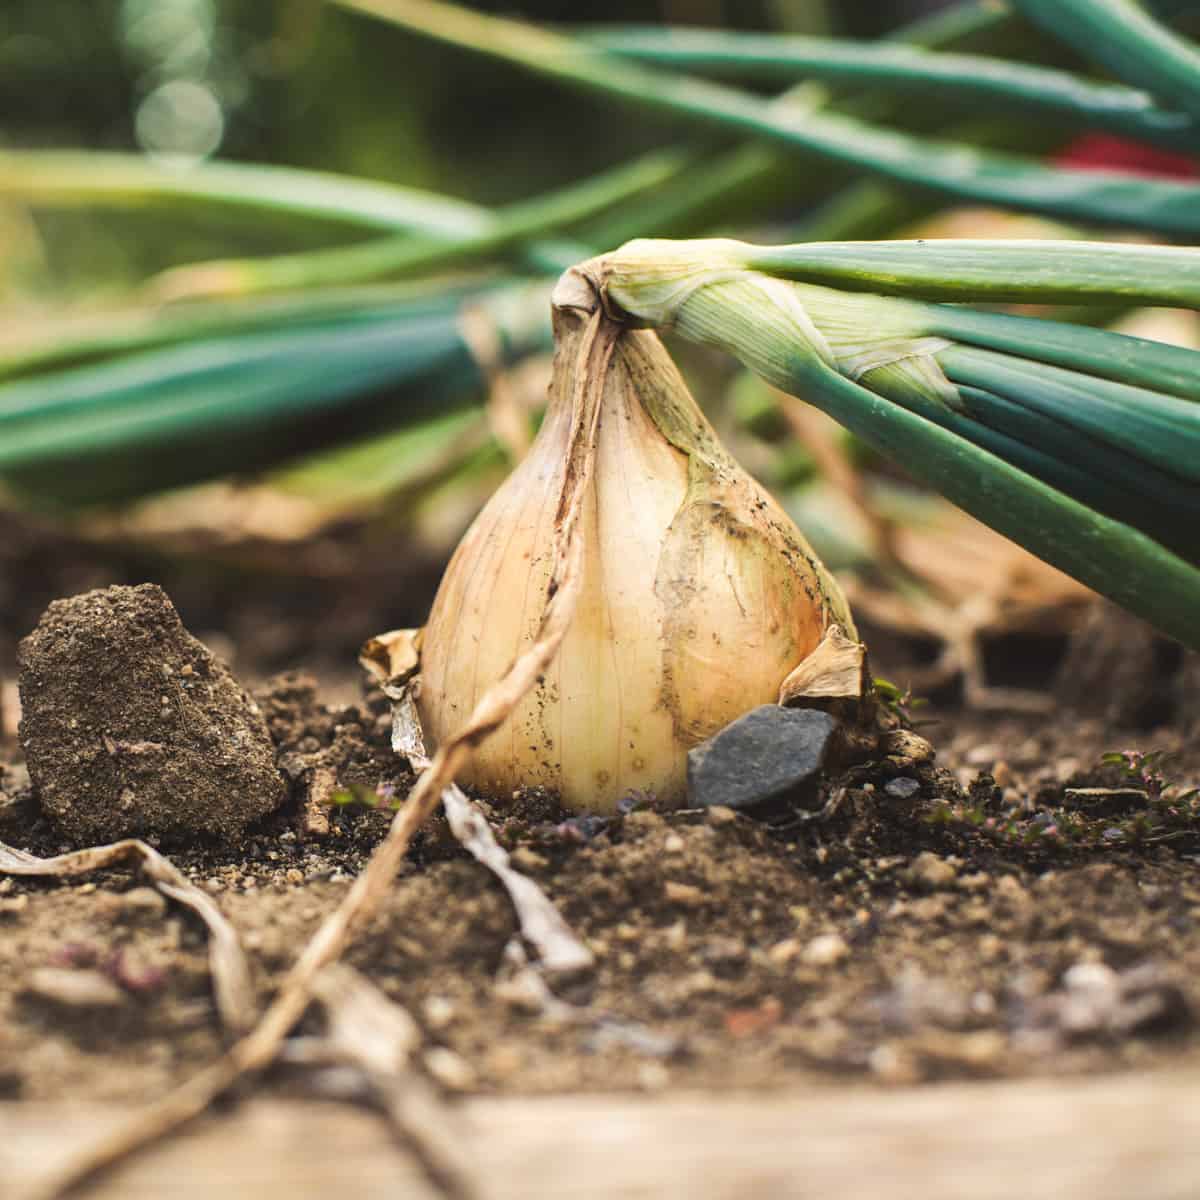 Growing onions in a raised bed